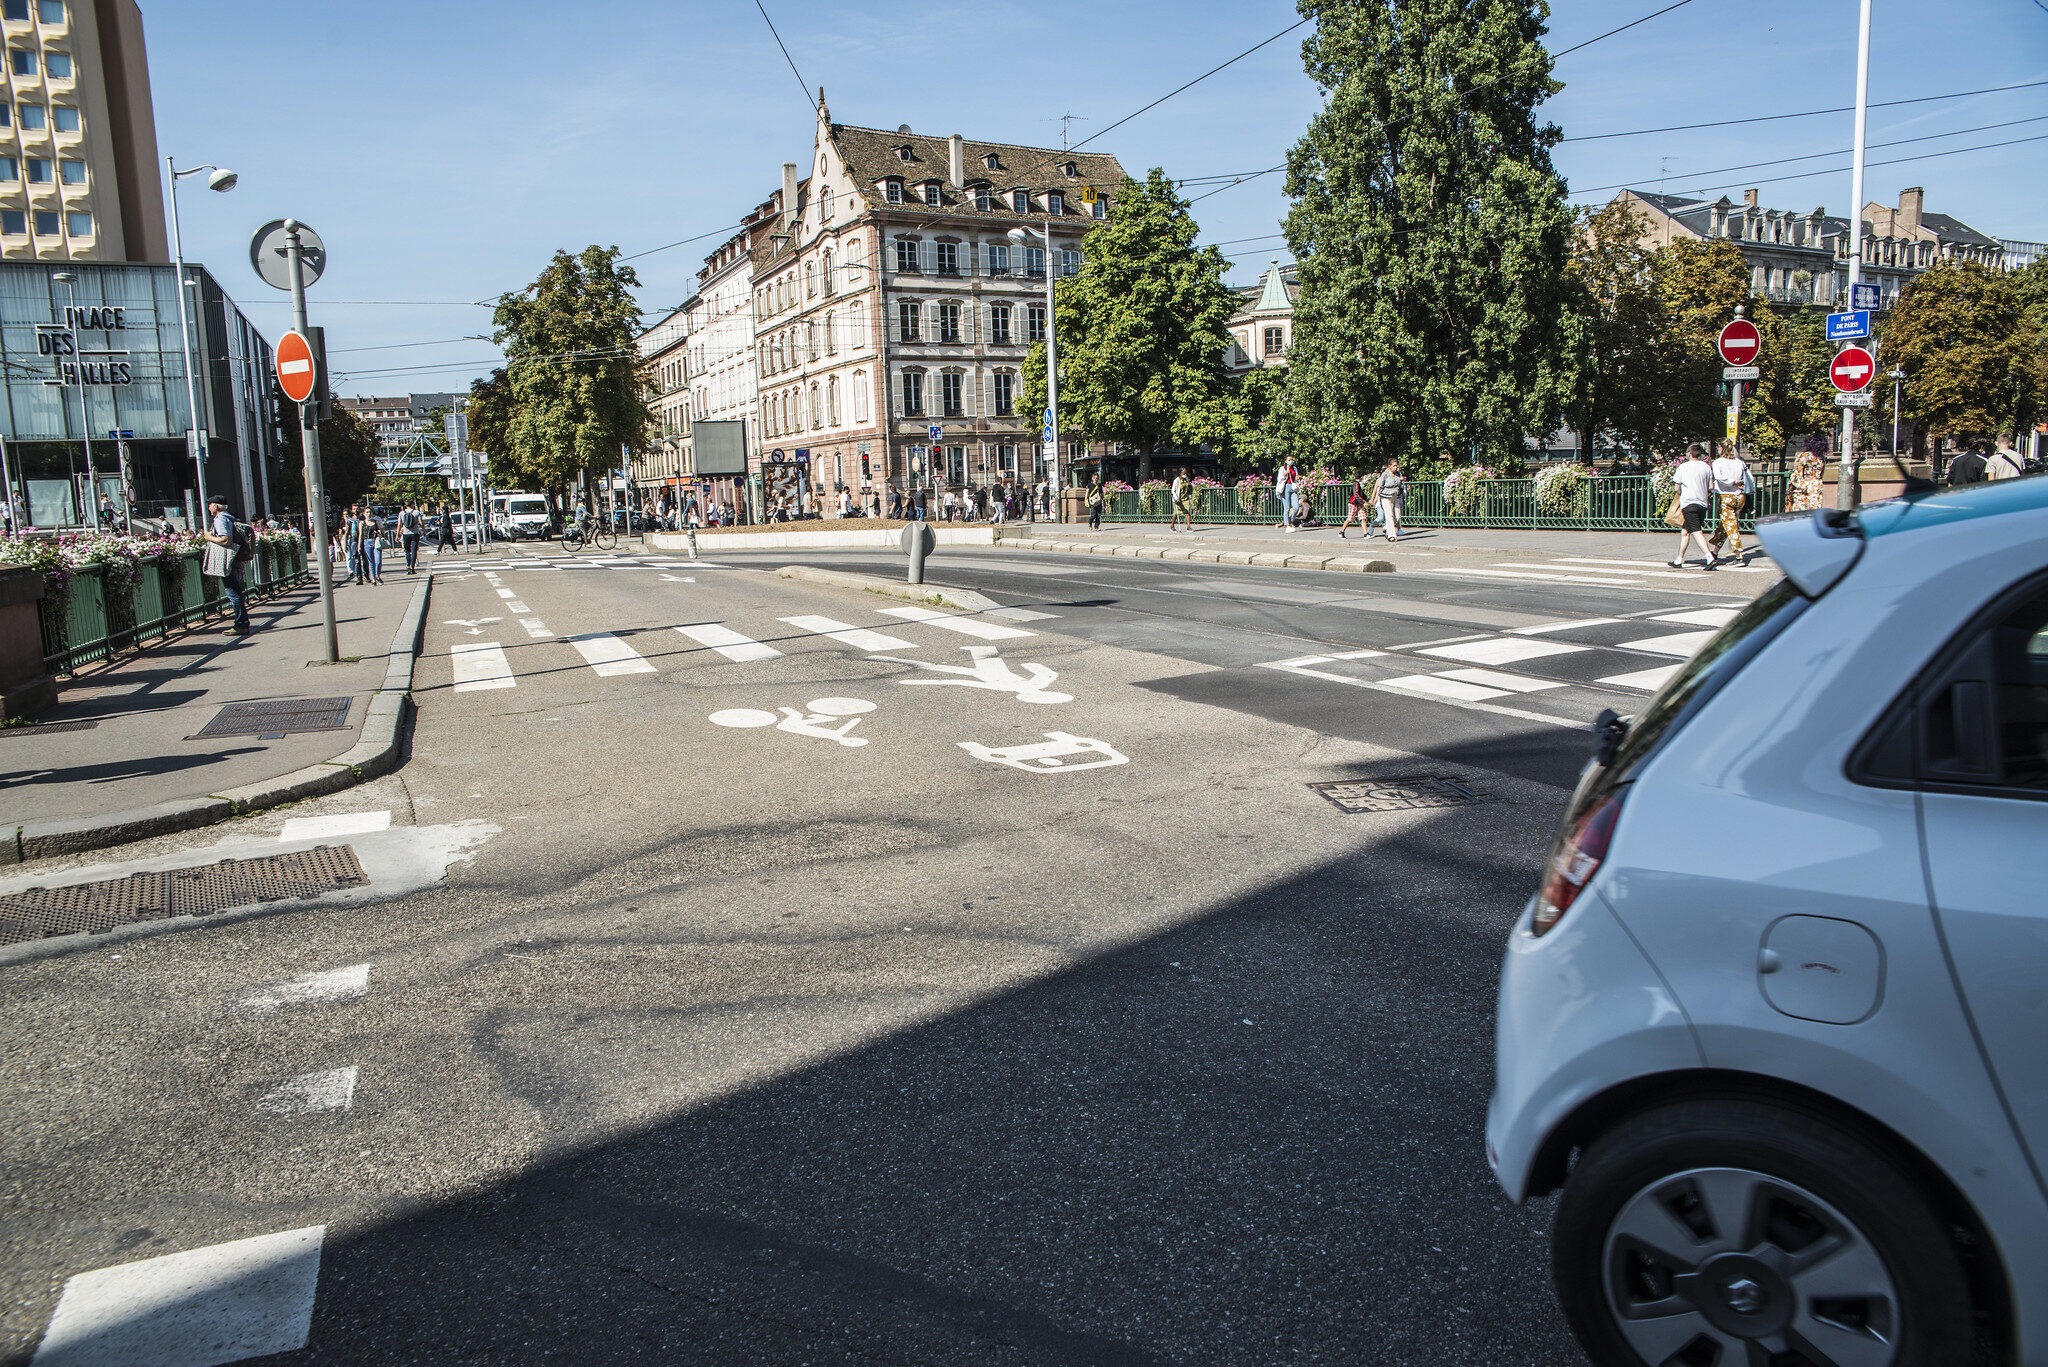 Velo_strasbourg_ring_cyclable_contournement_martin_lelievre_rue89_strasbourg